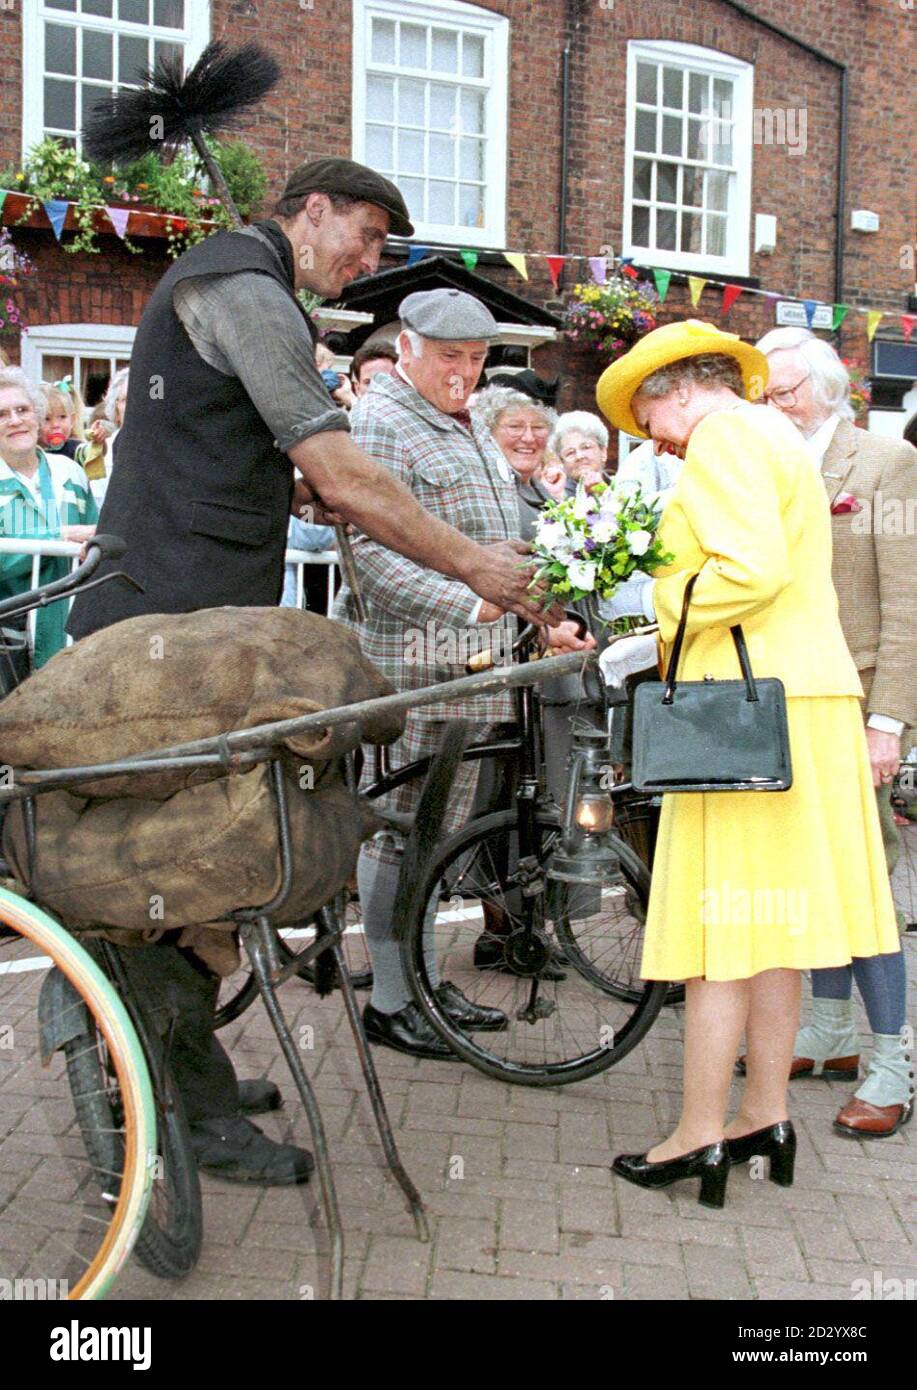 The Queen carefully checks the soot stained hand of chimney sweep Martin Cook, before agreeing to a hand shake while on a walkabout in Bridge Street, Runcorn, part of her Cheshire vist today (Friday). PA Rota picure by Dave Kendall/PA Stock Photo